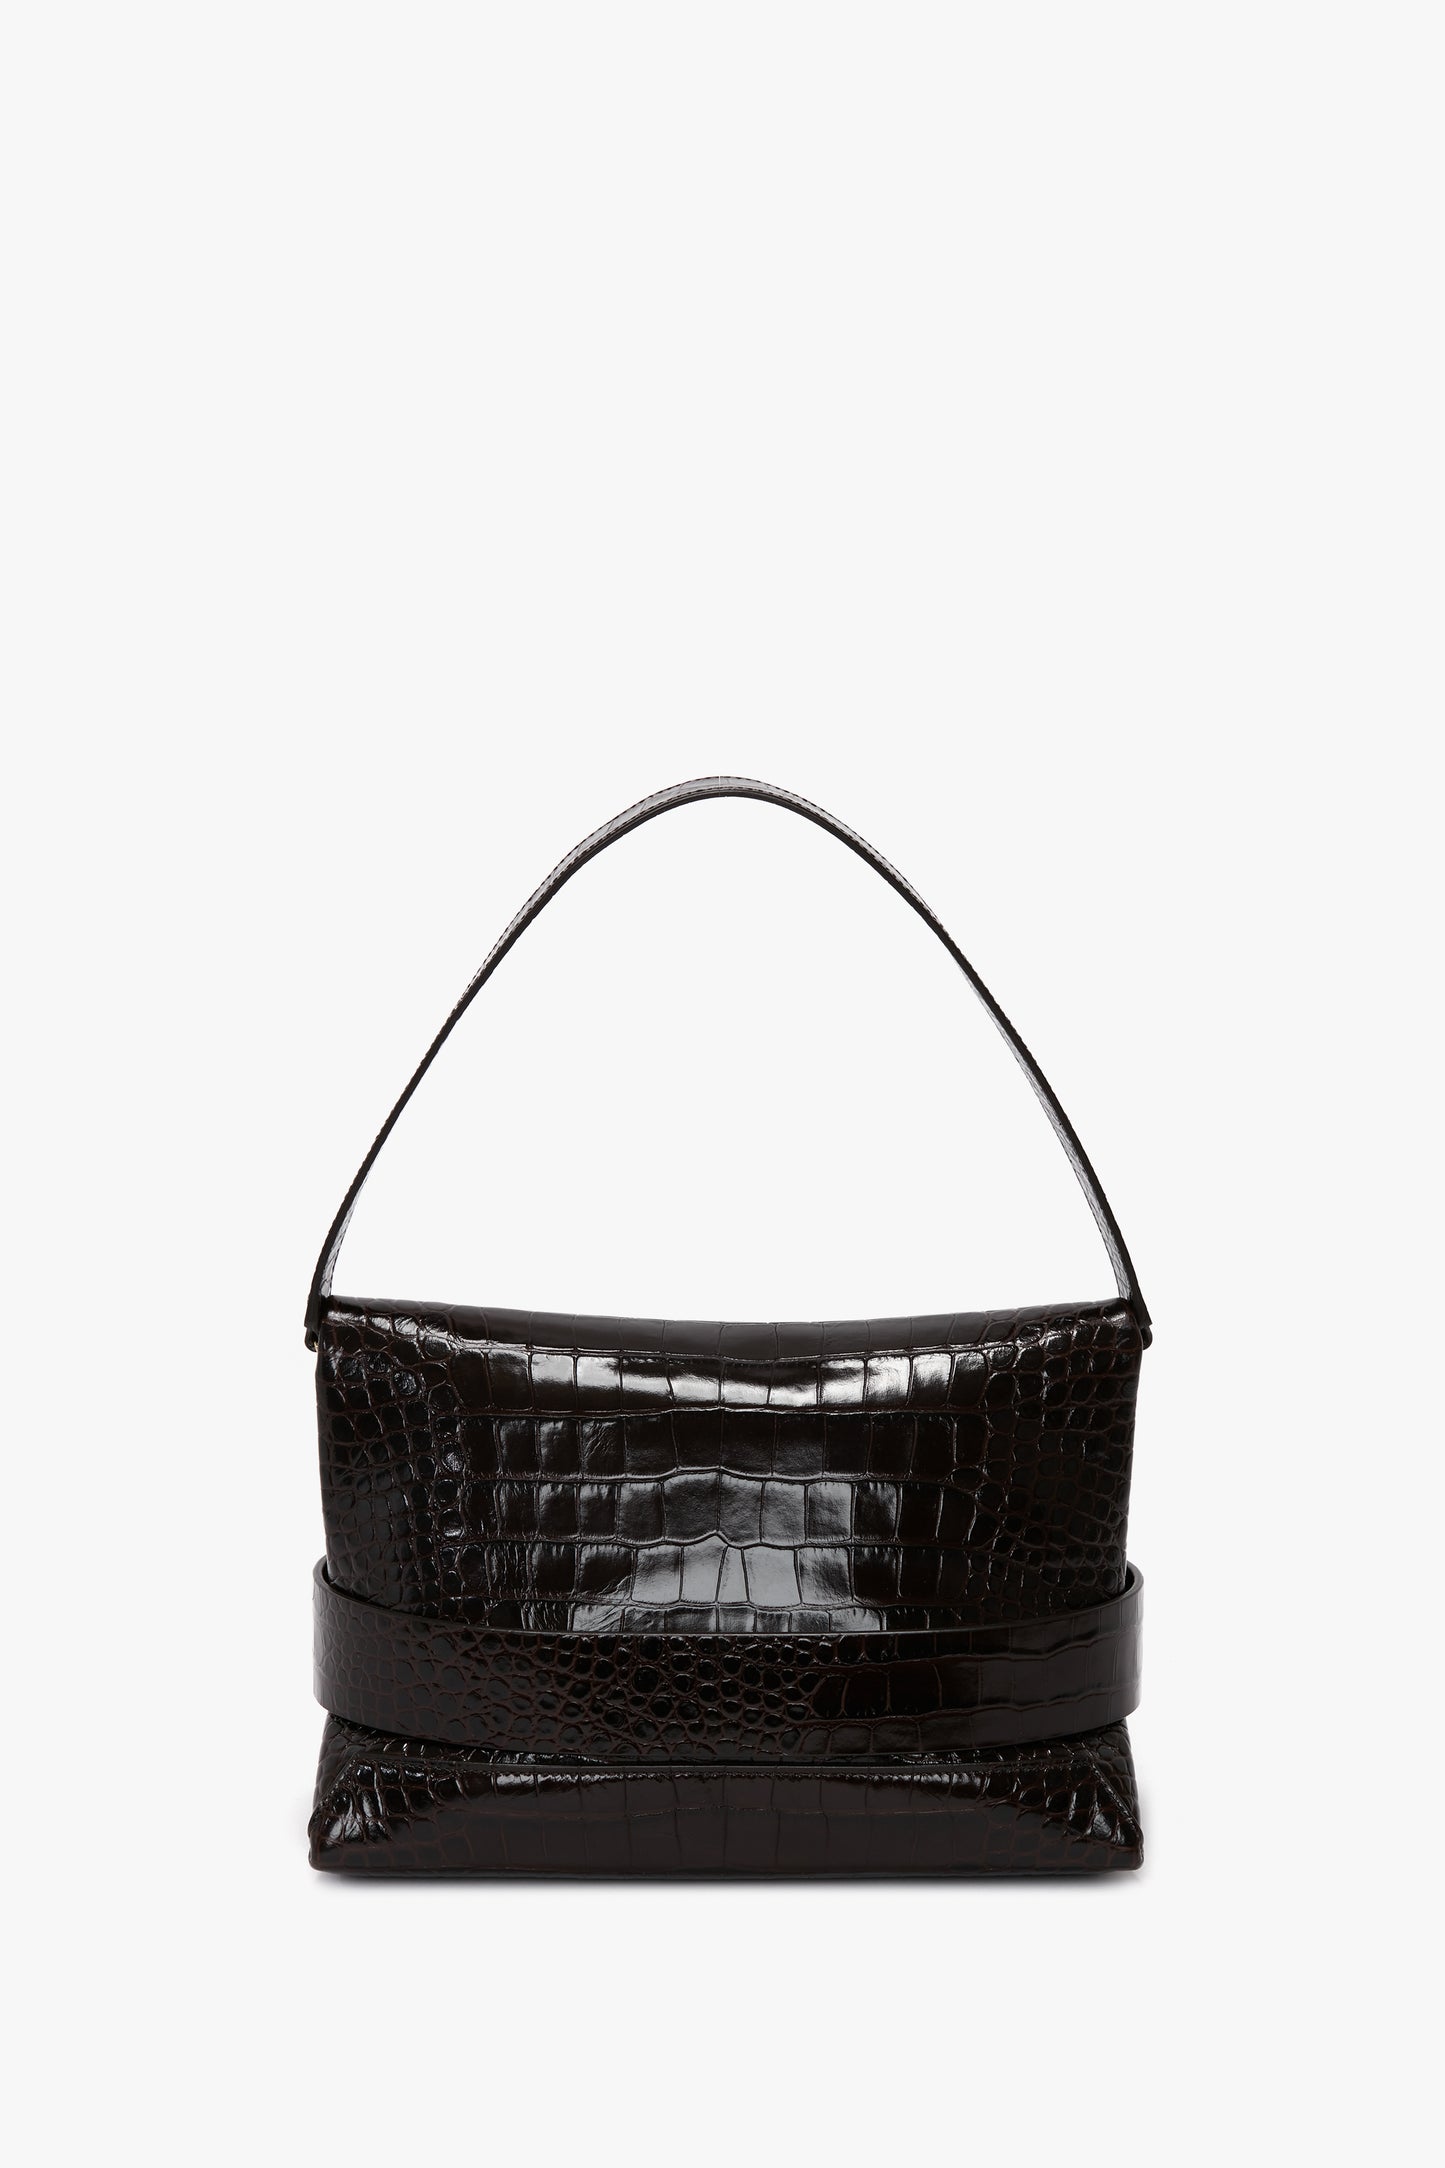 A black, rectangular B Pouch Bag In Croc Effect Espresso Leather crafted from calf leather by Victoria Beckham, with a top handle and detachable shoulder strap, featuring an embossed crocodile print.